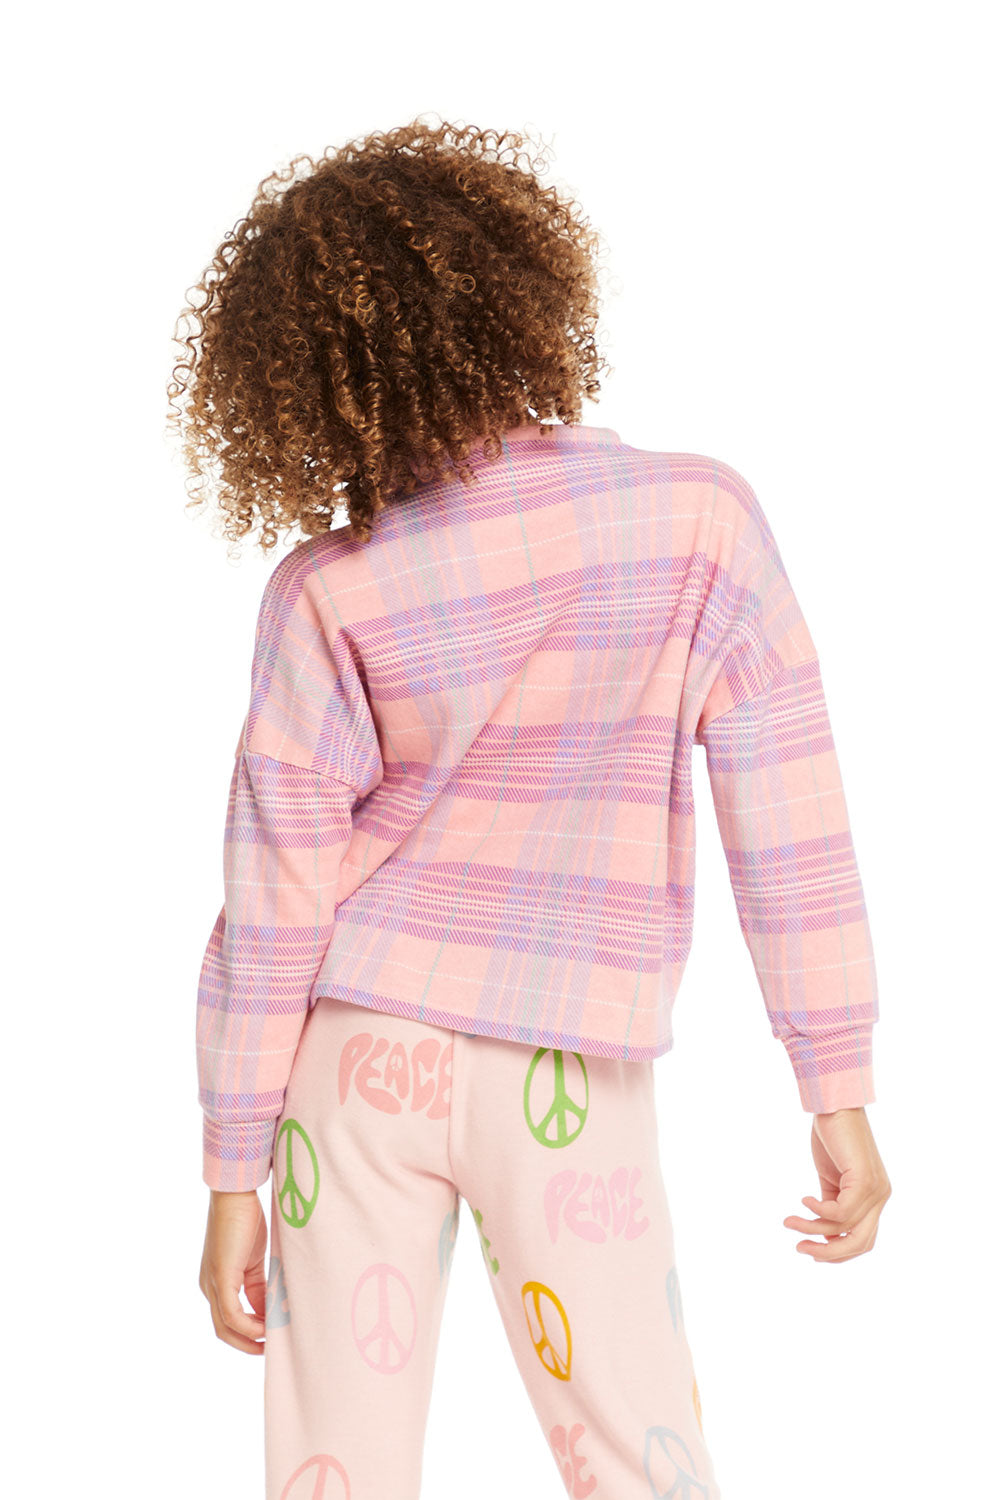 Mock Neck Cotton Candy Plaid Dolman Pullover GIRLS chaserbrand